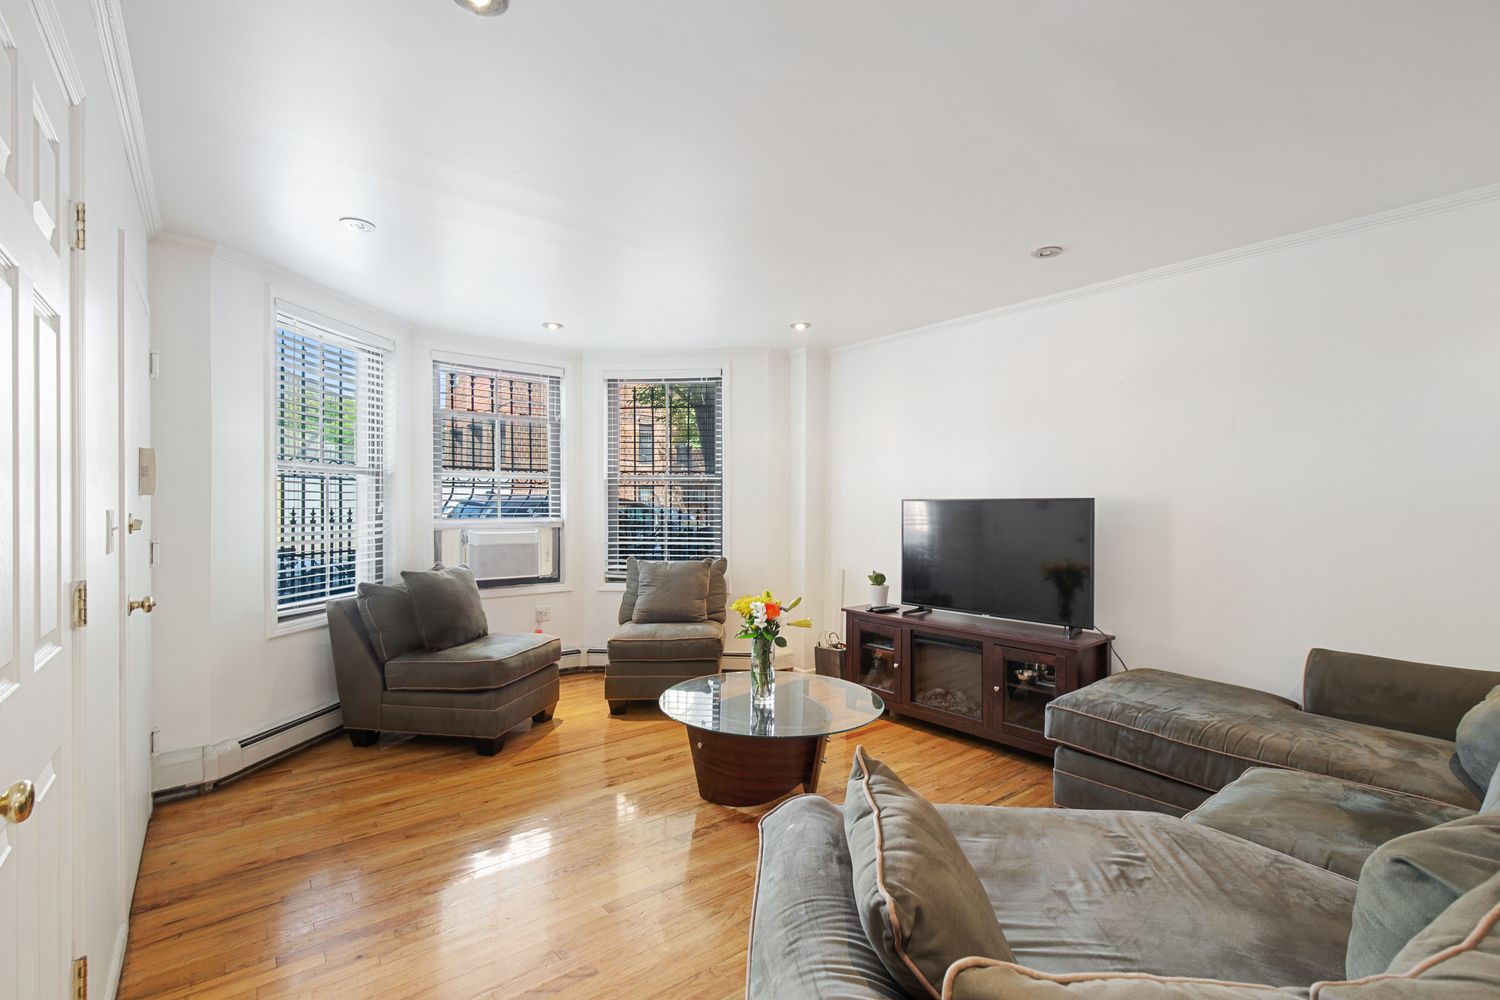 Apartments & Houses for Rent in Fort Greene, Brooklyn, NY